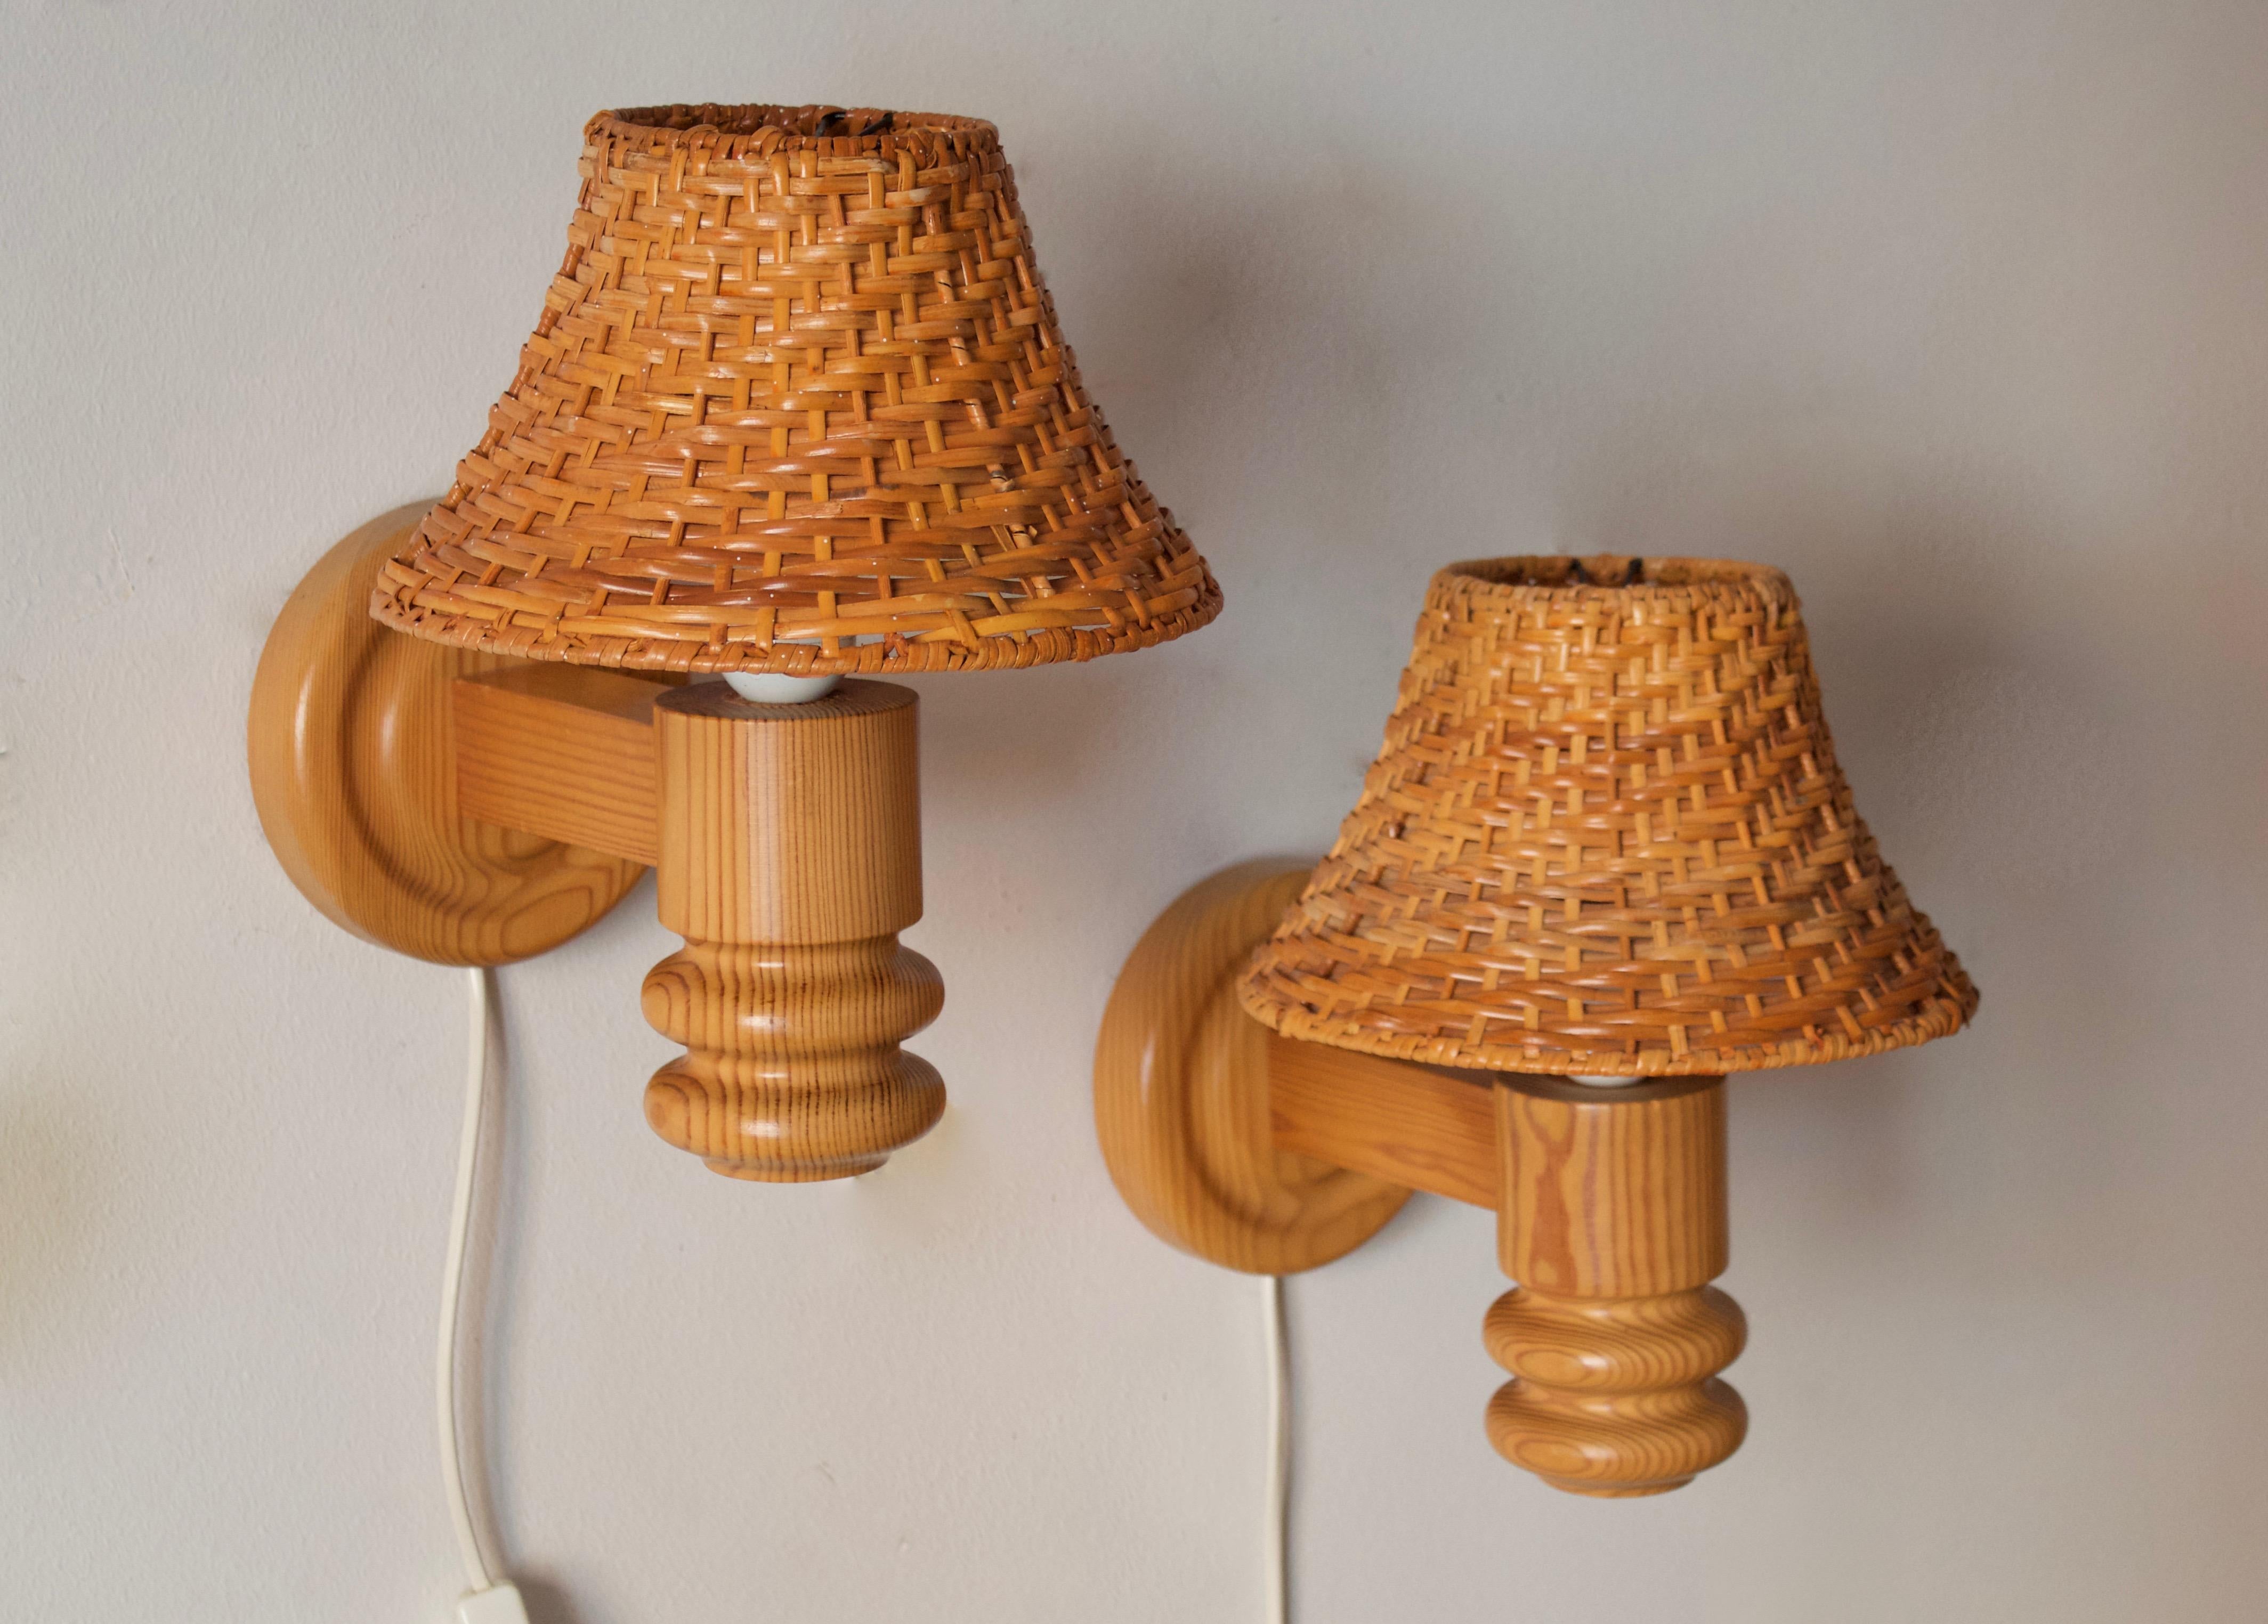 A pair of wall lights / sconces. Produced by Solbackens Svarveri. Sweden, circa 1970s. Assorted vintage rattan lampshades.

Stated dimensions include rattan lampshades as illustrated. Lampshades included in purchase might vary very slightly to